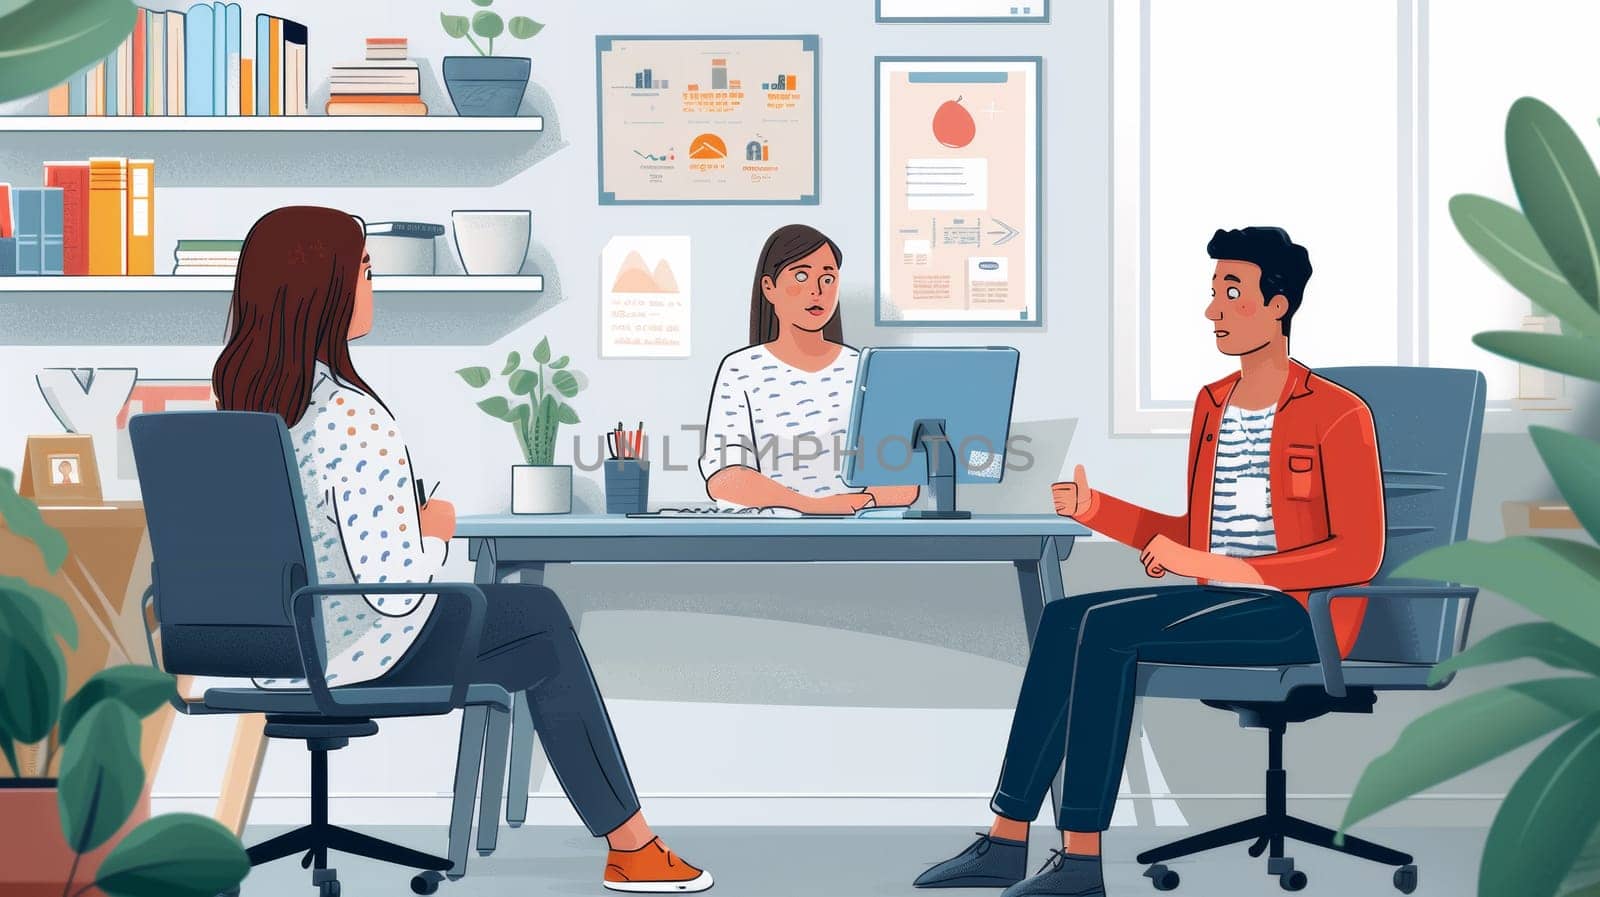 A cartoon illustration of two people sitting at a desk talking to each other